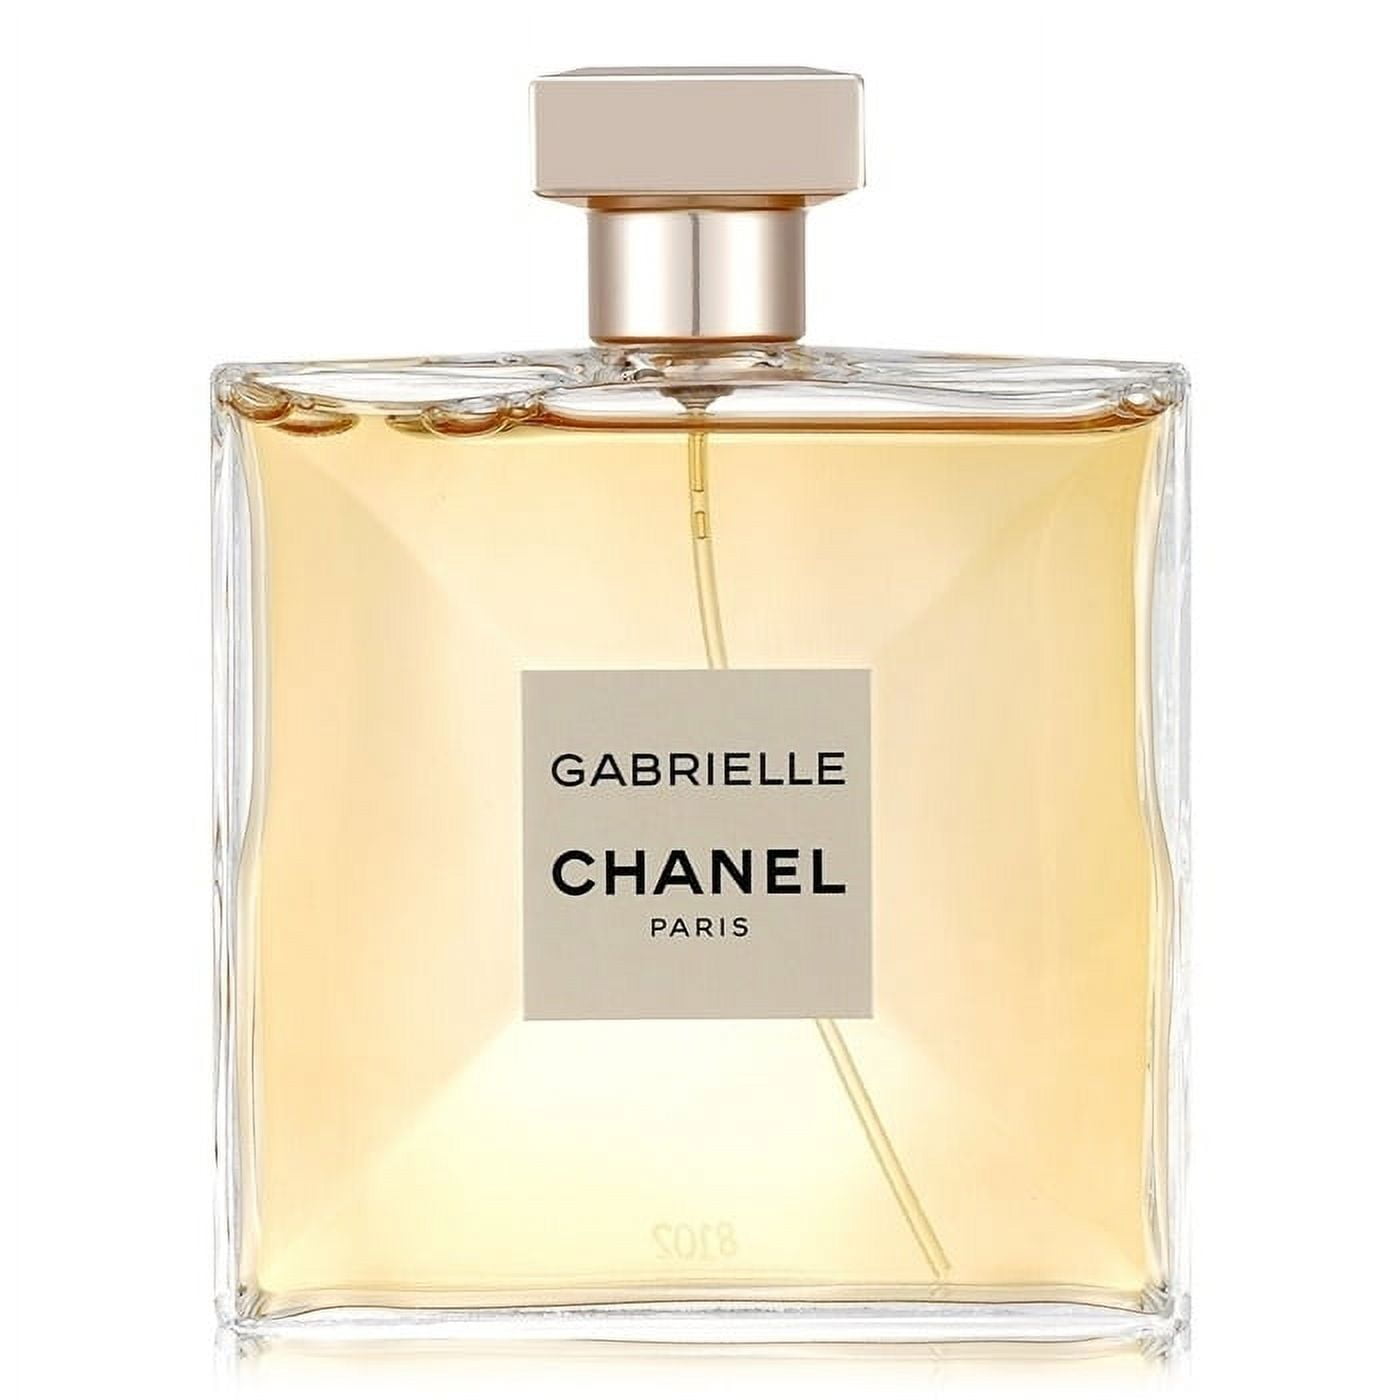 CHANEL - EVERY EAU DE CHANEL IS A JOURNEY Inspired by destinations